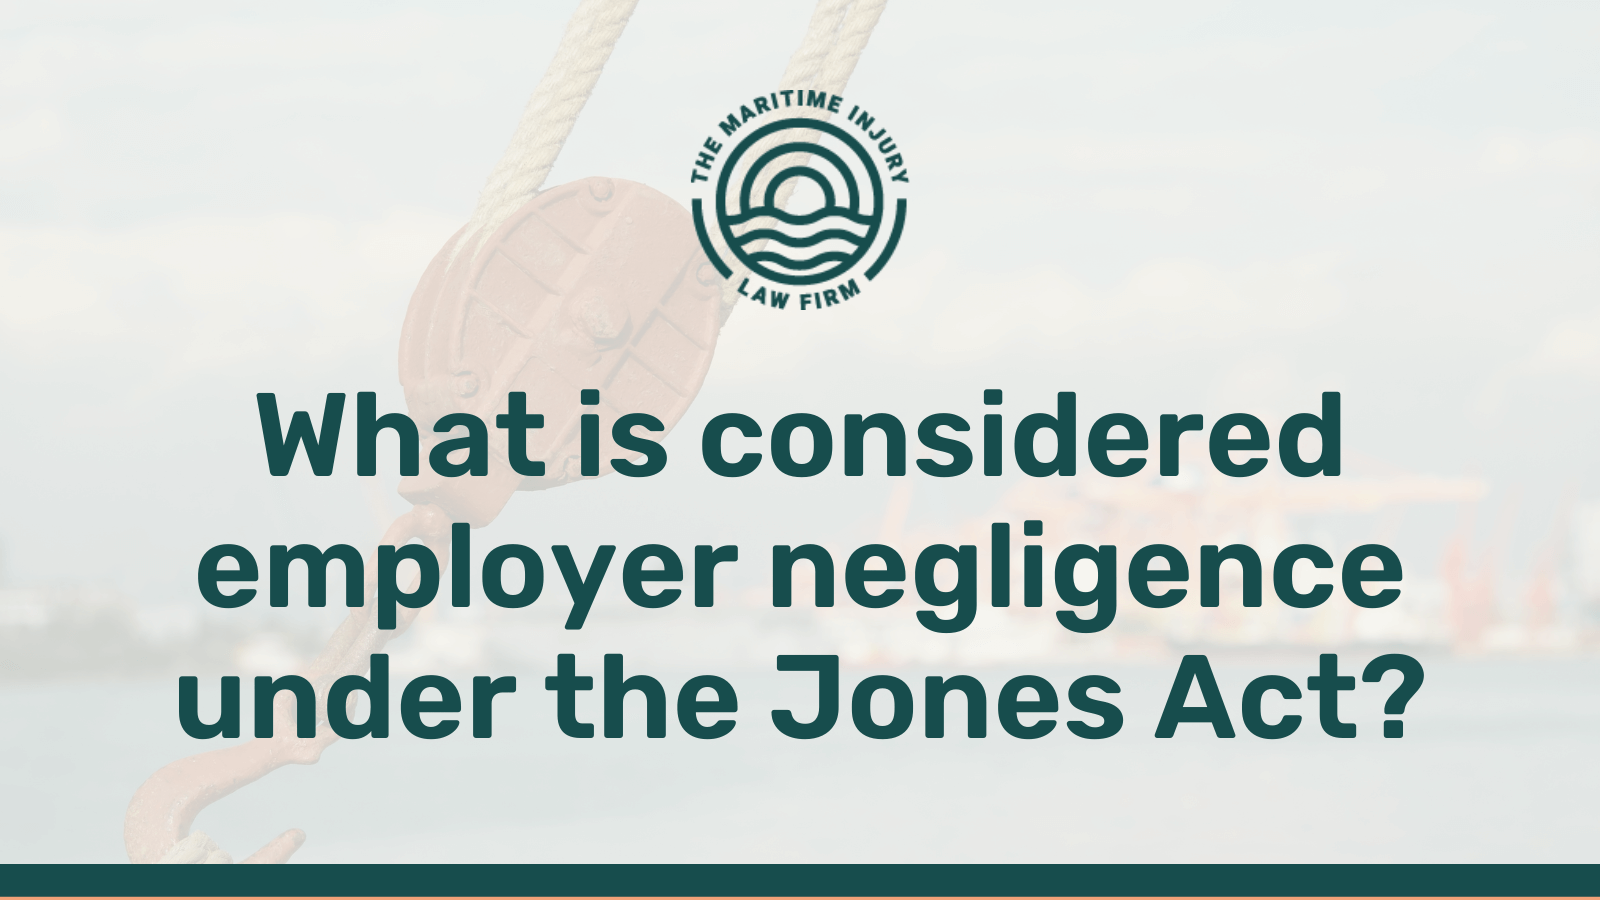 What is considered employer negligence under the Jones Act - maritime injury law firm - George Vourvoulias